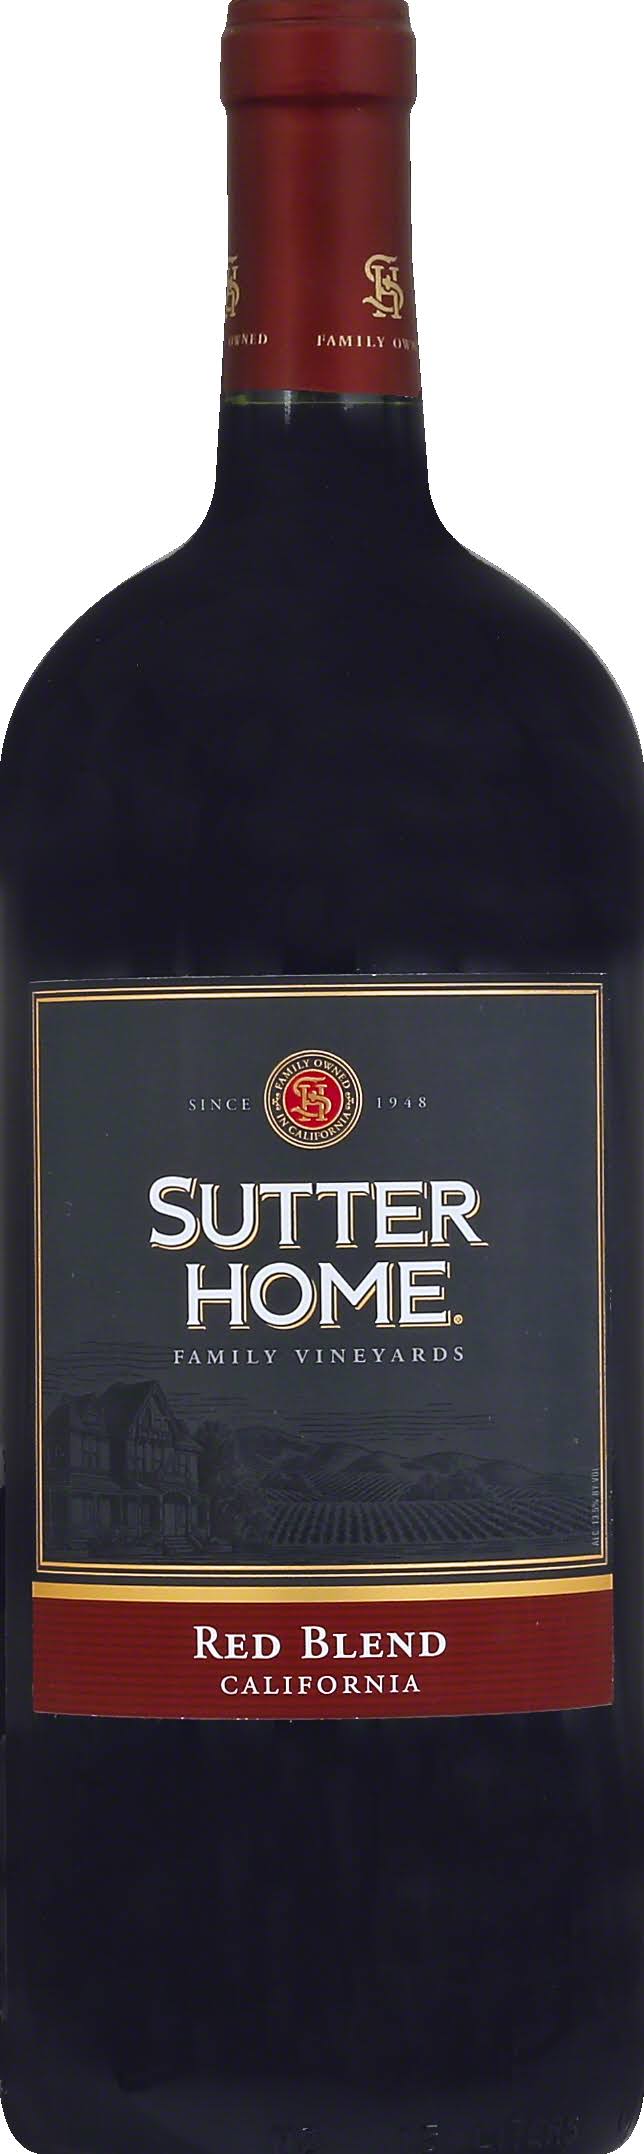 Sutter Home Red Blend Wine